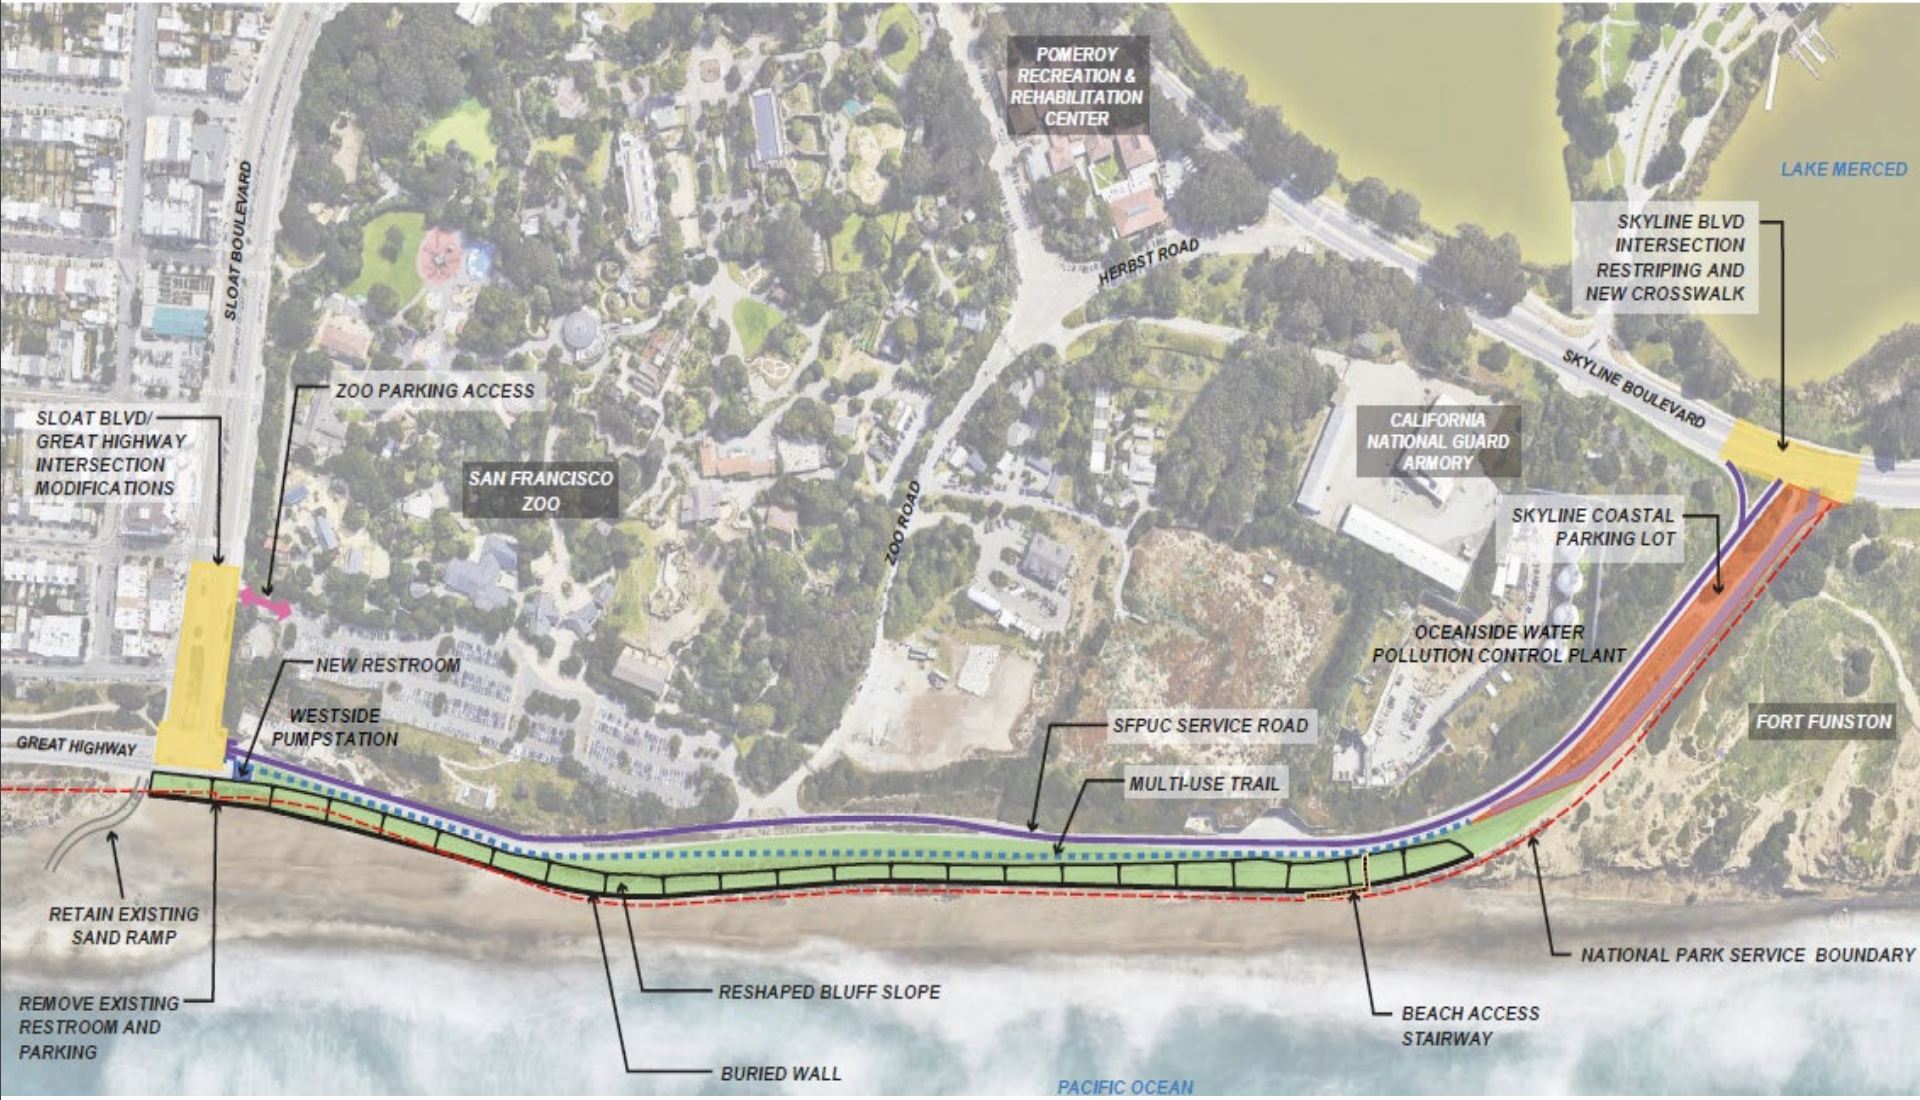 The image is an overhead map showing proposed modifications and access points for the San Francisco Zoo area, Great Highway, and surrounding roads, including trails and parking.